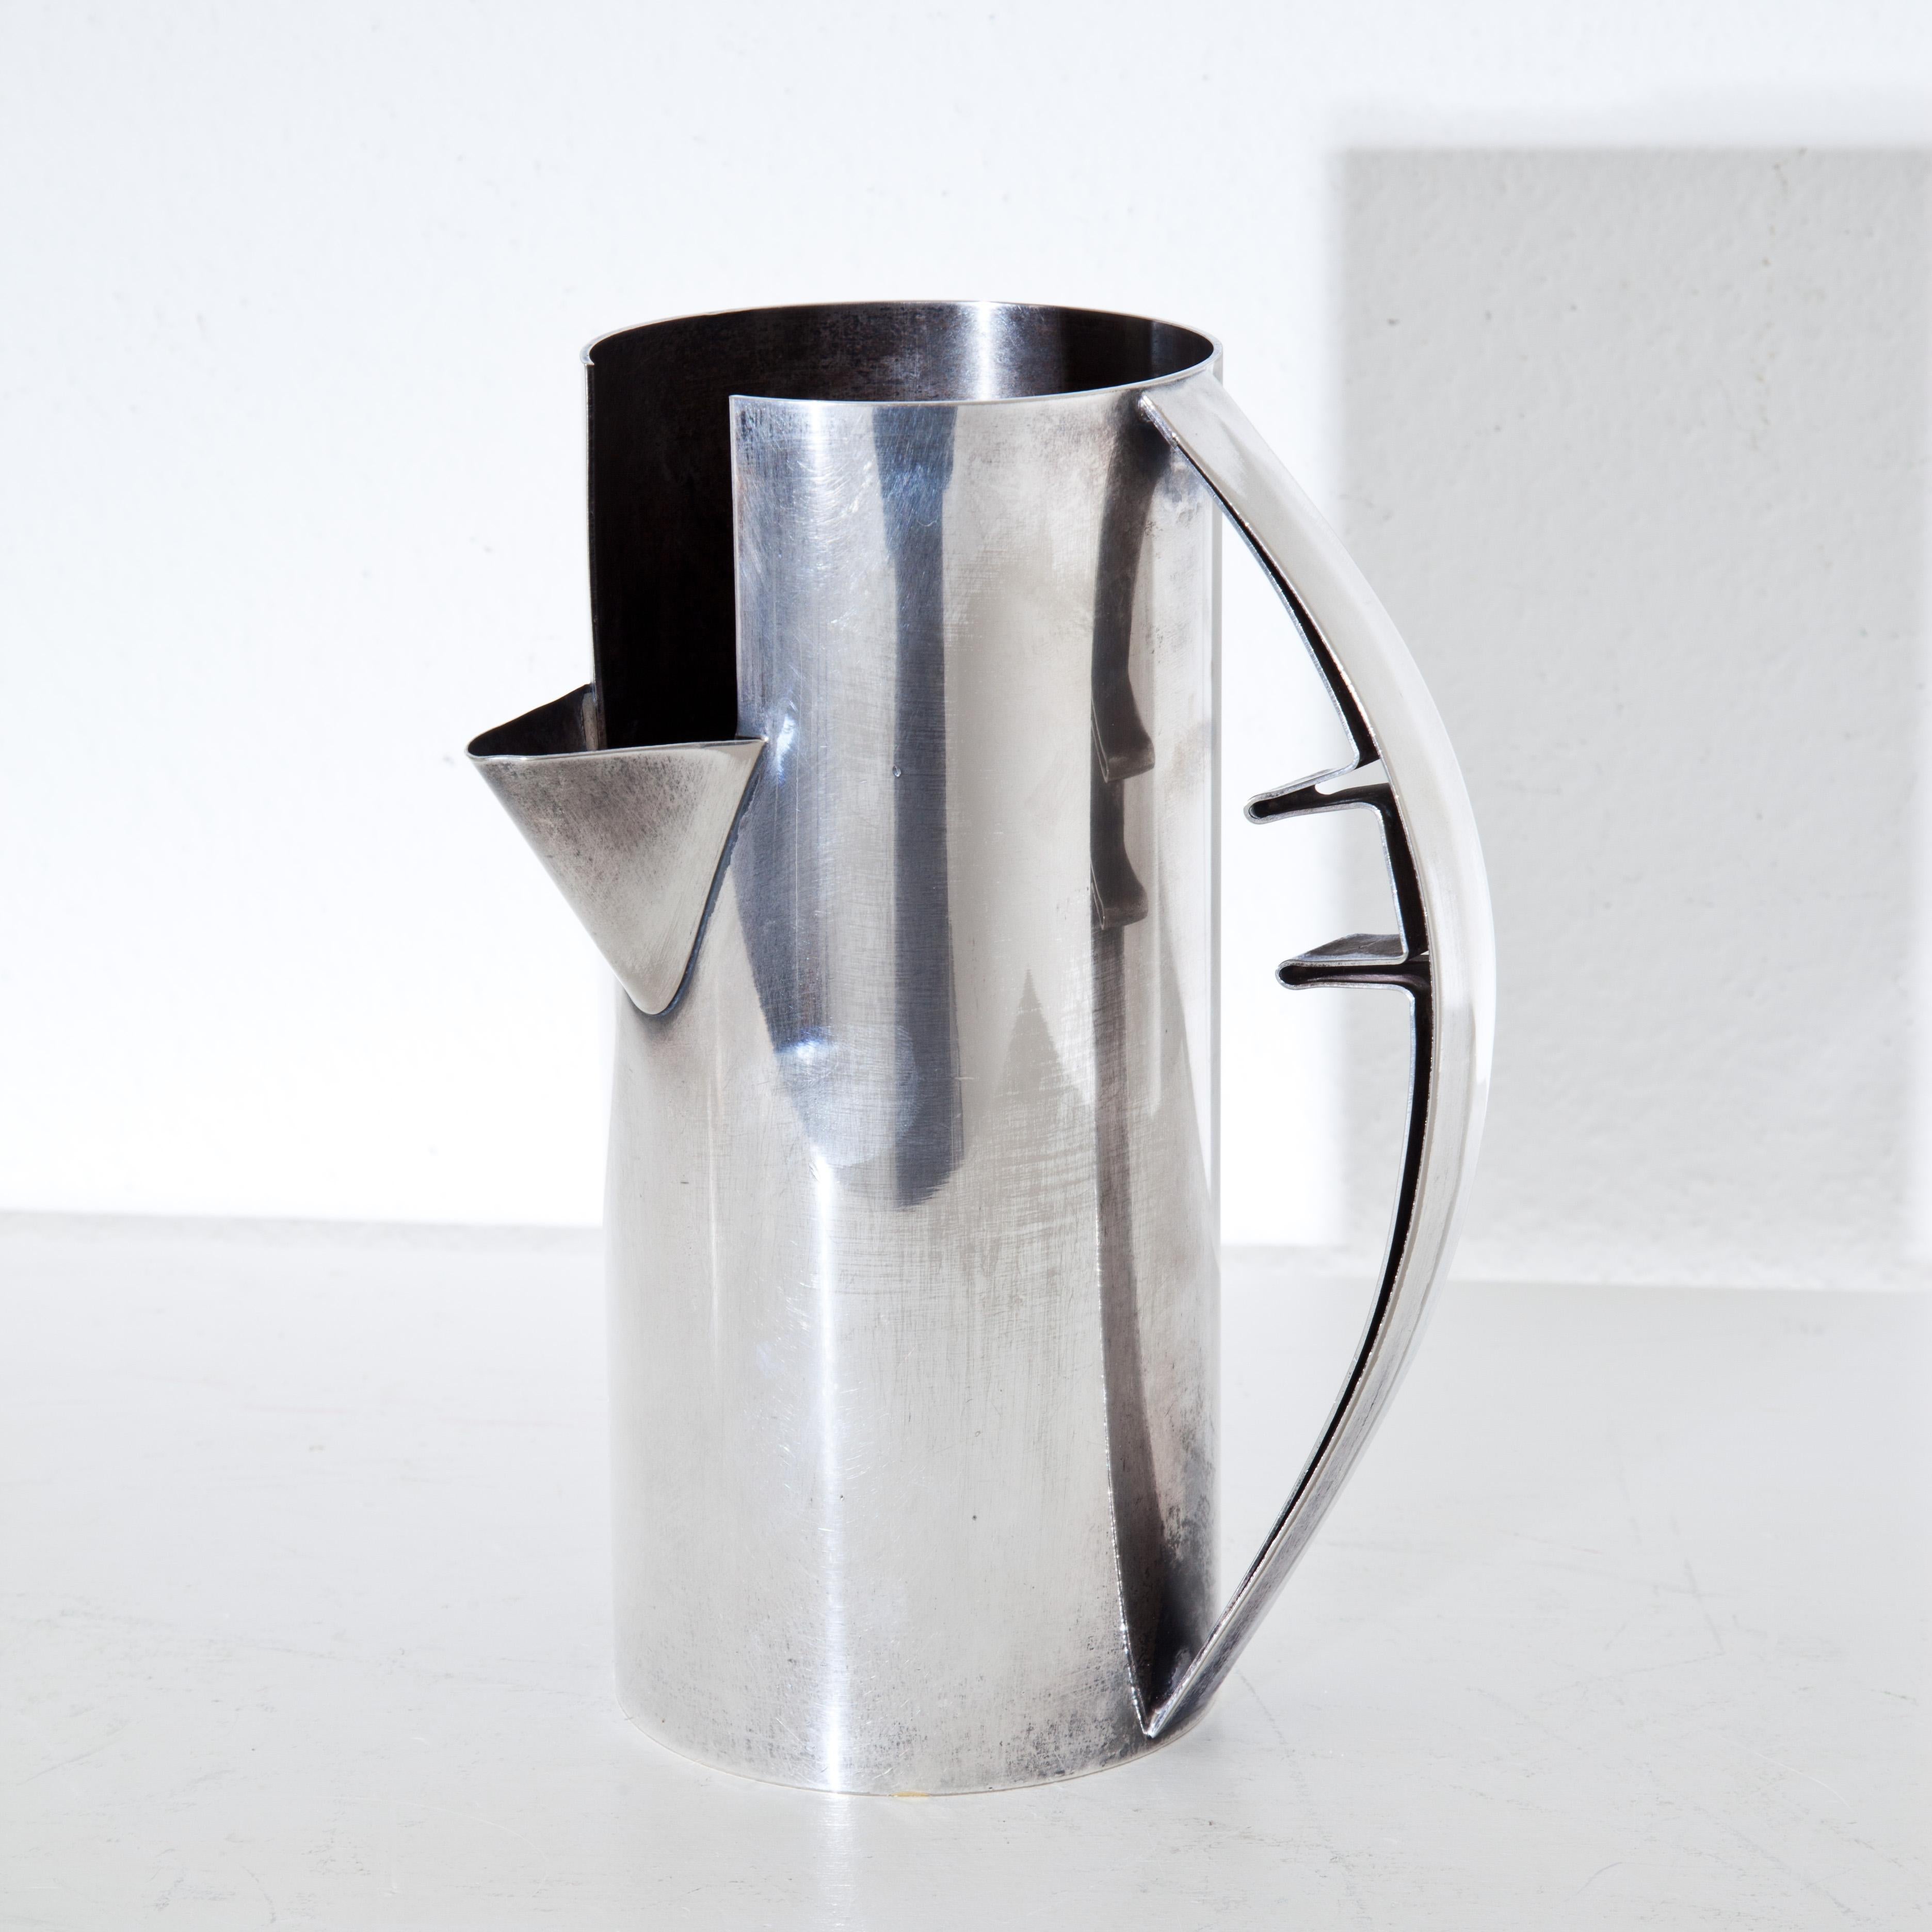 Mid-Century Modern Carlo Scarpa Pitcher for Cleto Murani, Italy 1970s, Silver Plated